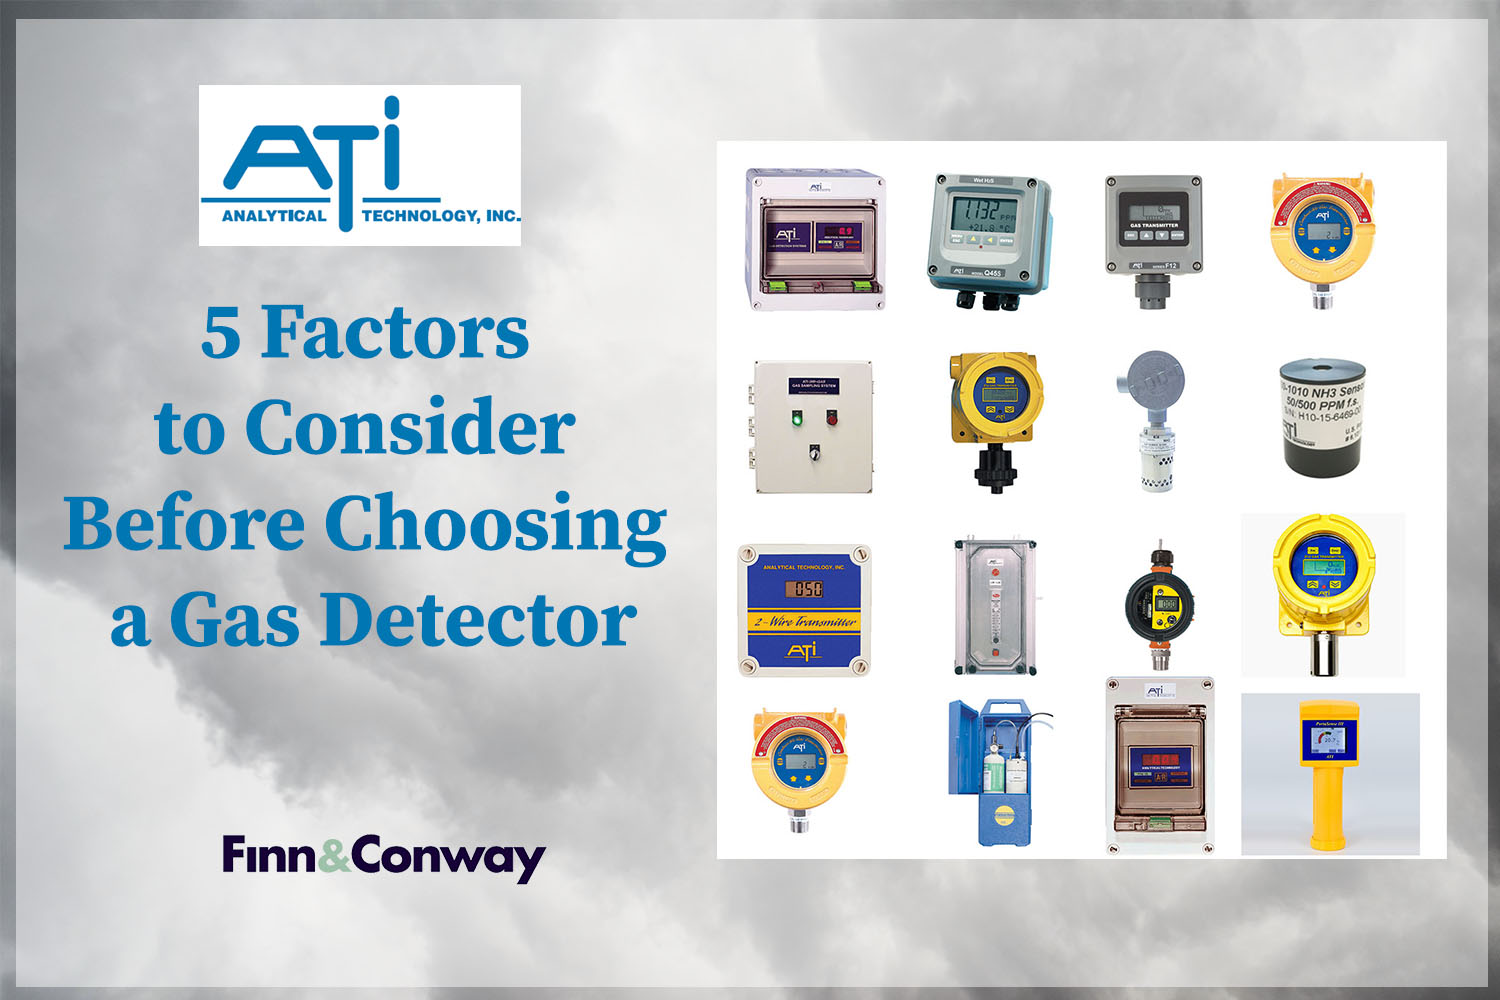 5 Factors to Consider When Choosing a Gas Detector